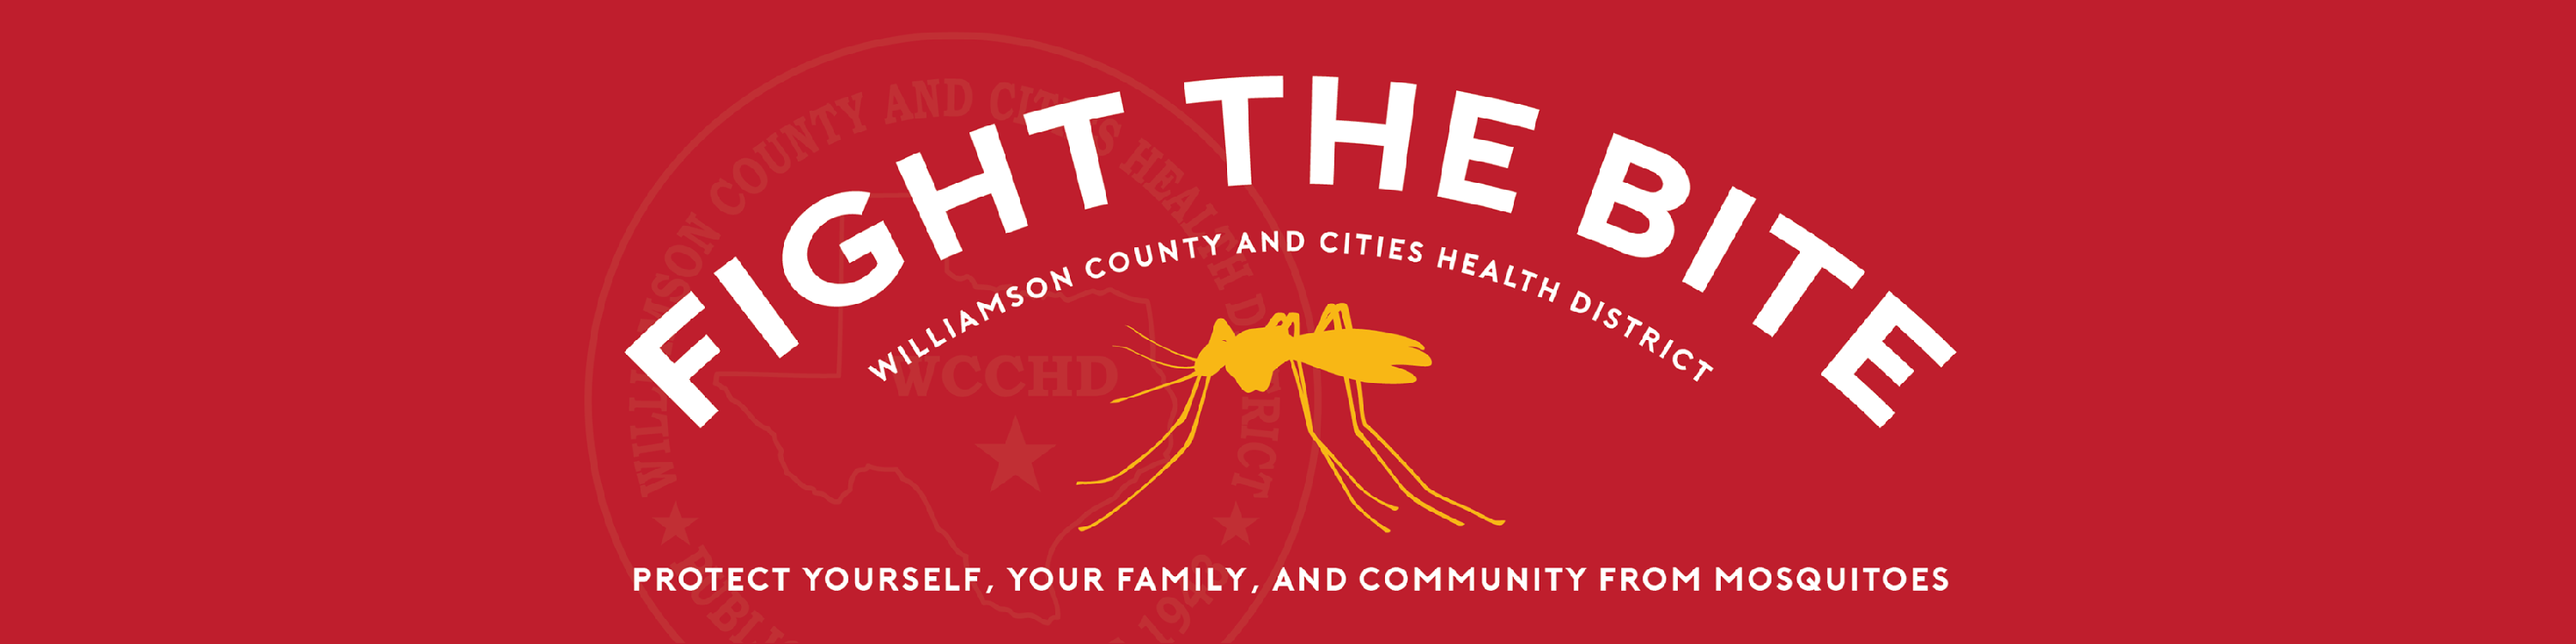 Fight the bite read website banner, "protect yourself. your family. and community from mosquitoes"